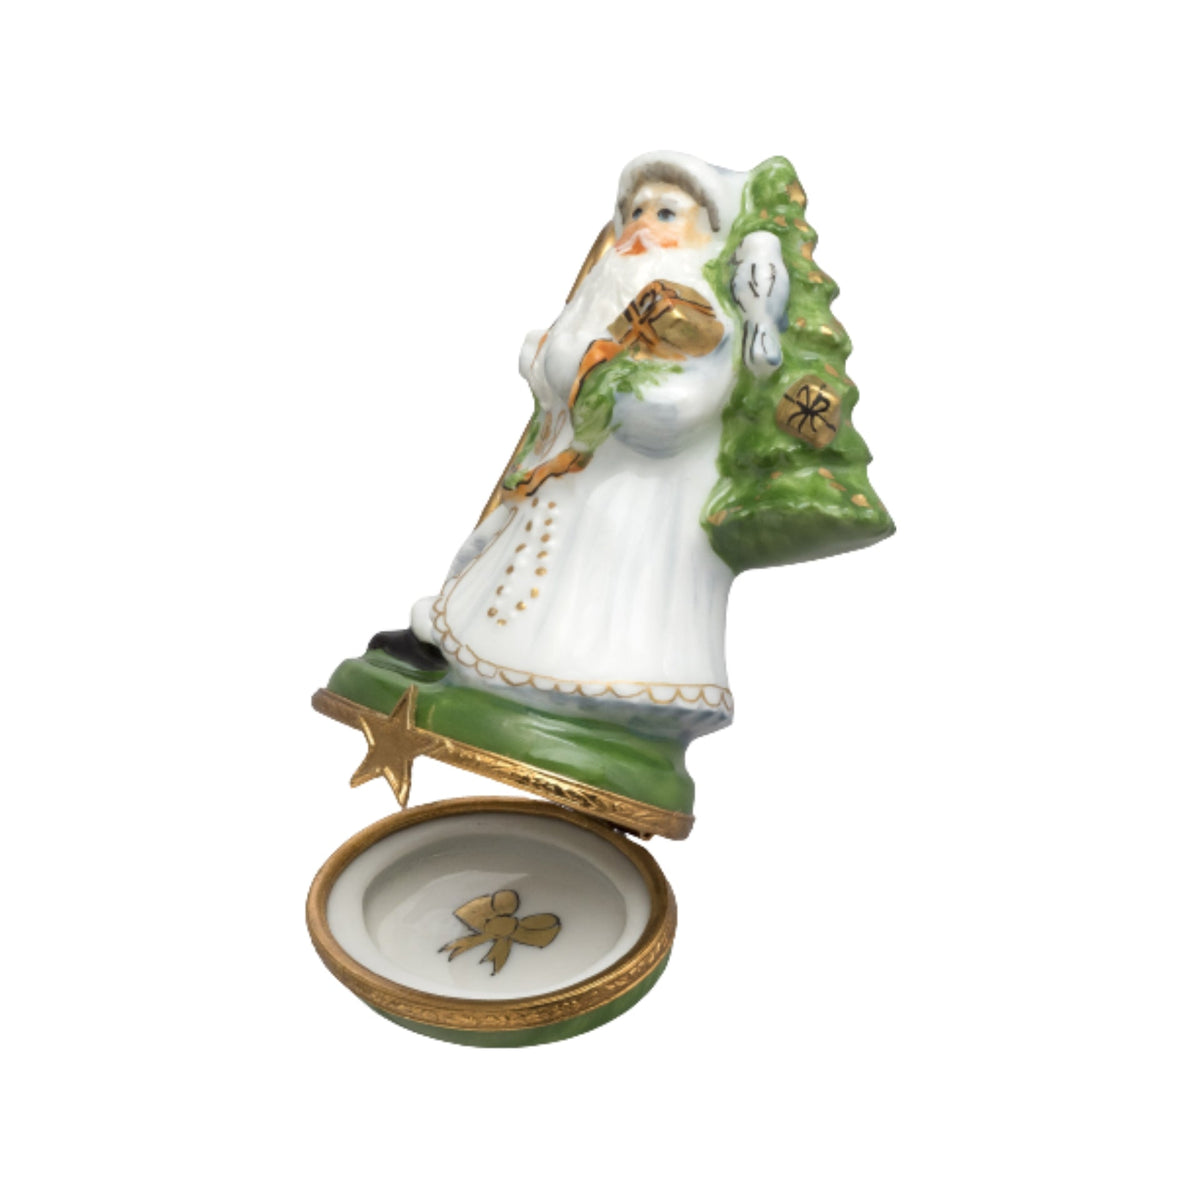 A close-up of a hand-painted Santa Claus figurine with intricate details